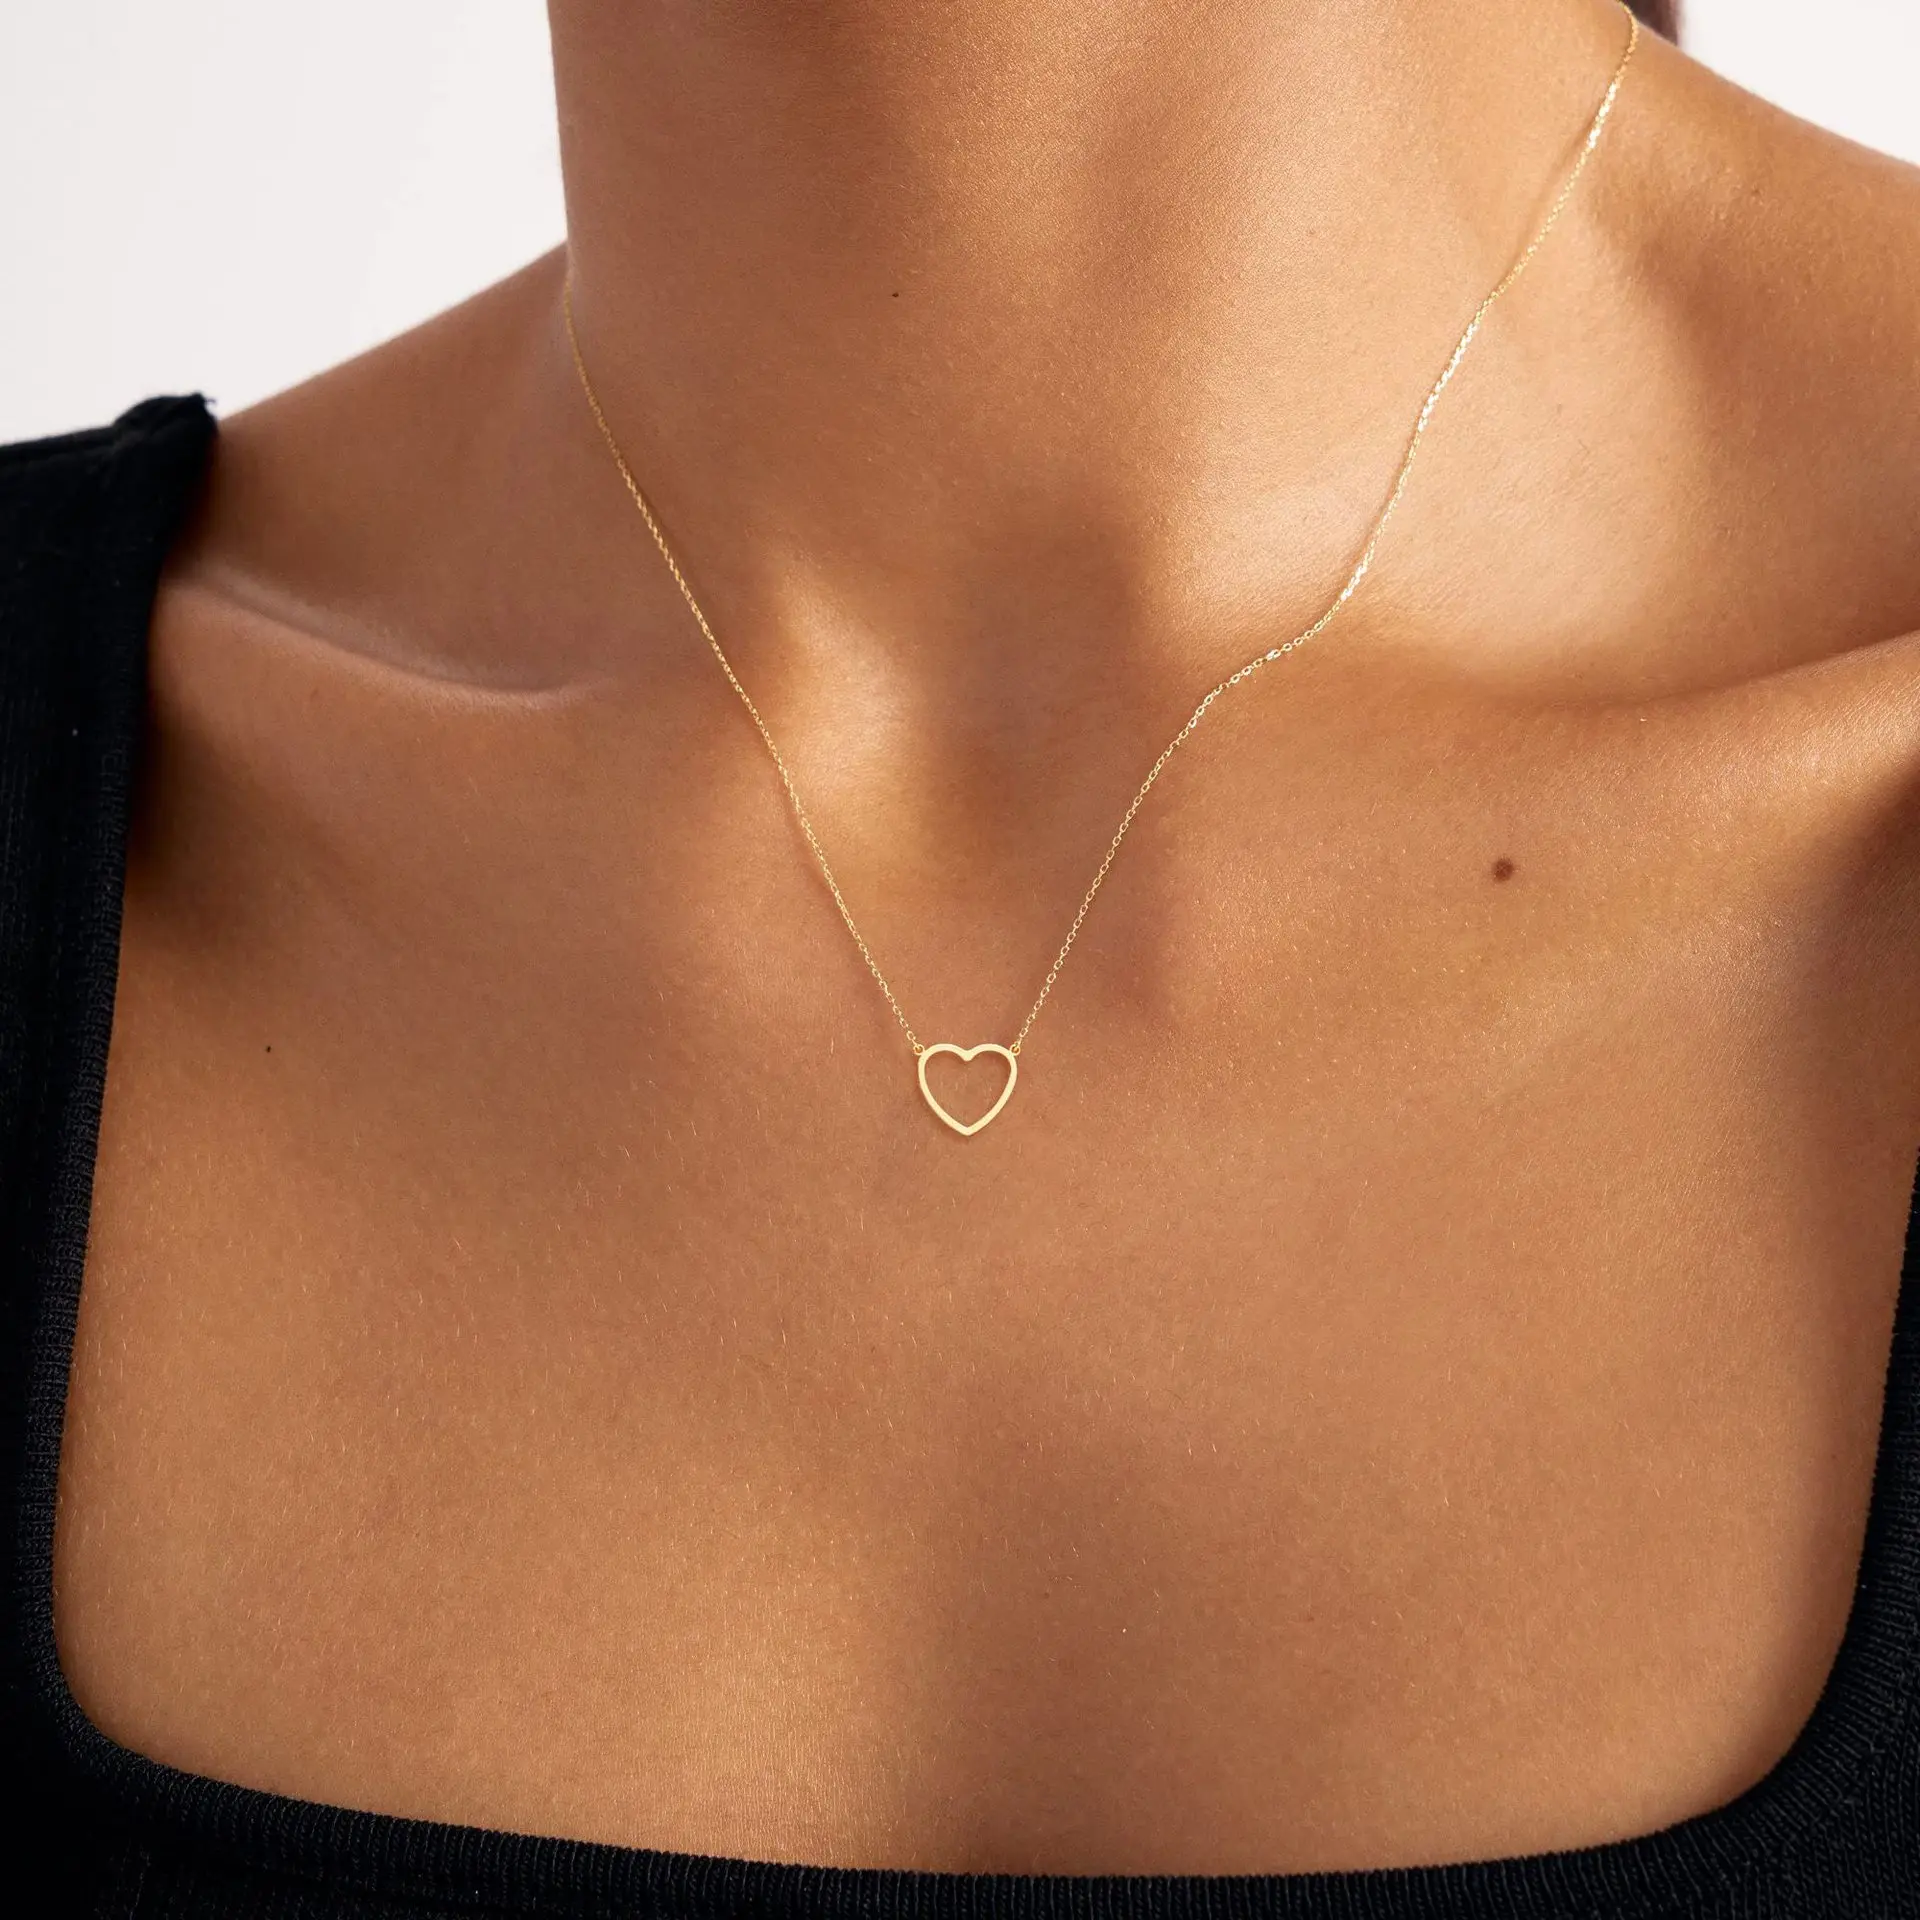 

GT Fashion Jewelry Stainless Steel 14K Gold Filled Small Cross Heart Choker Chain Necklace Women Jewelry